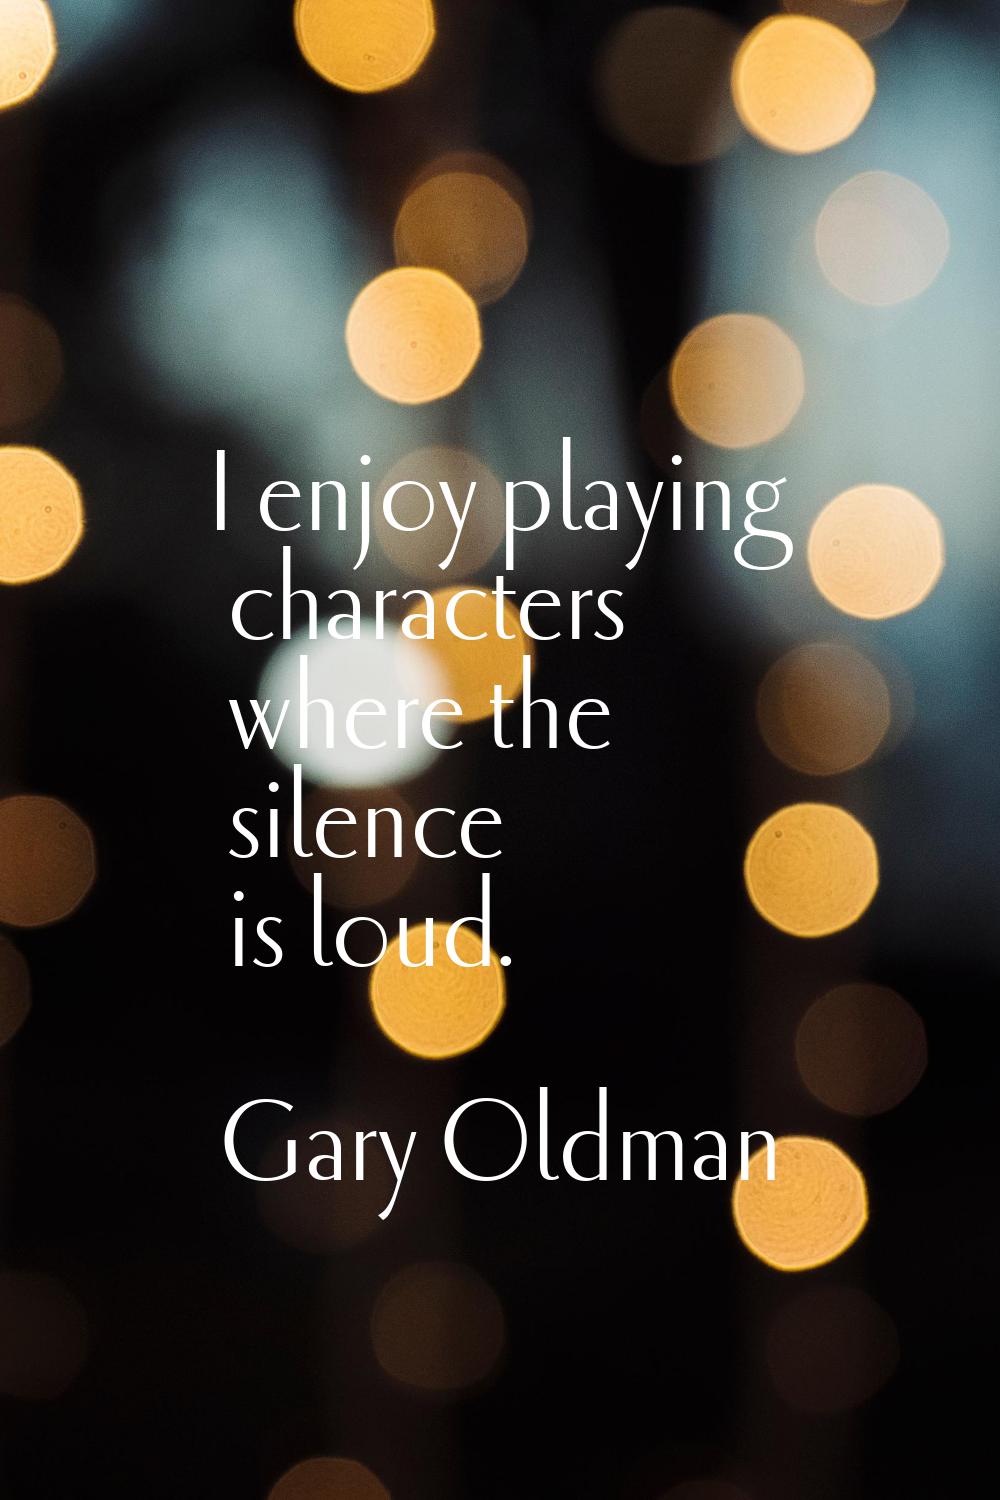 I enjoy playing characters where the silence is loud.